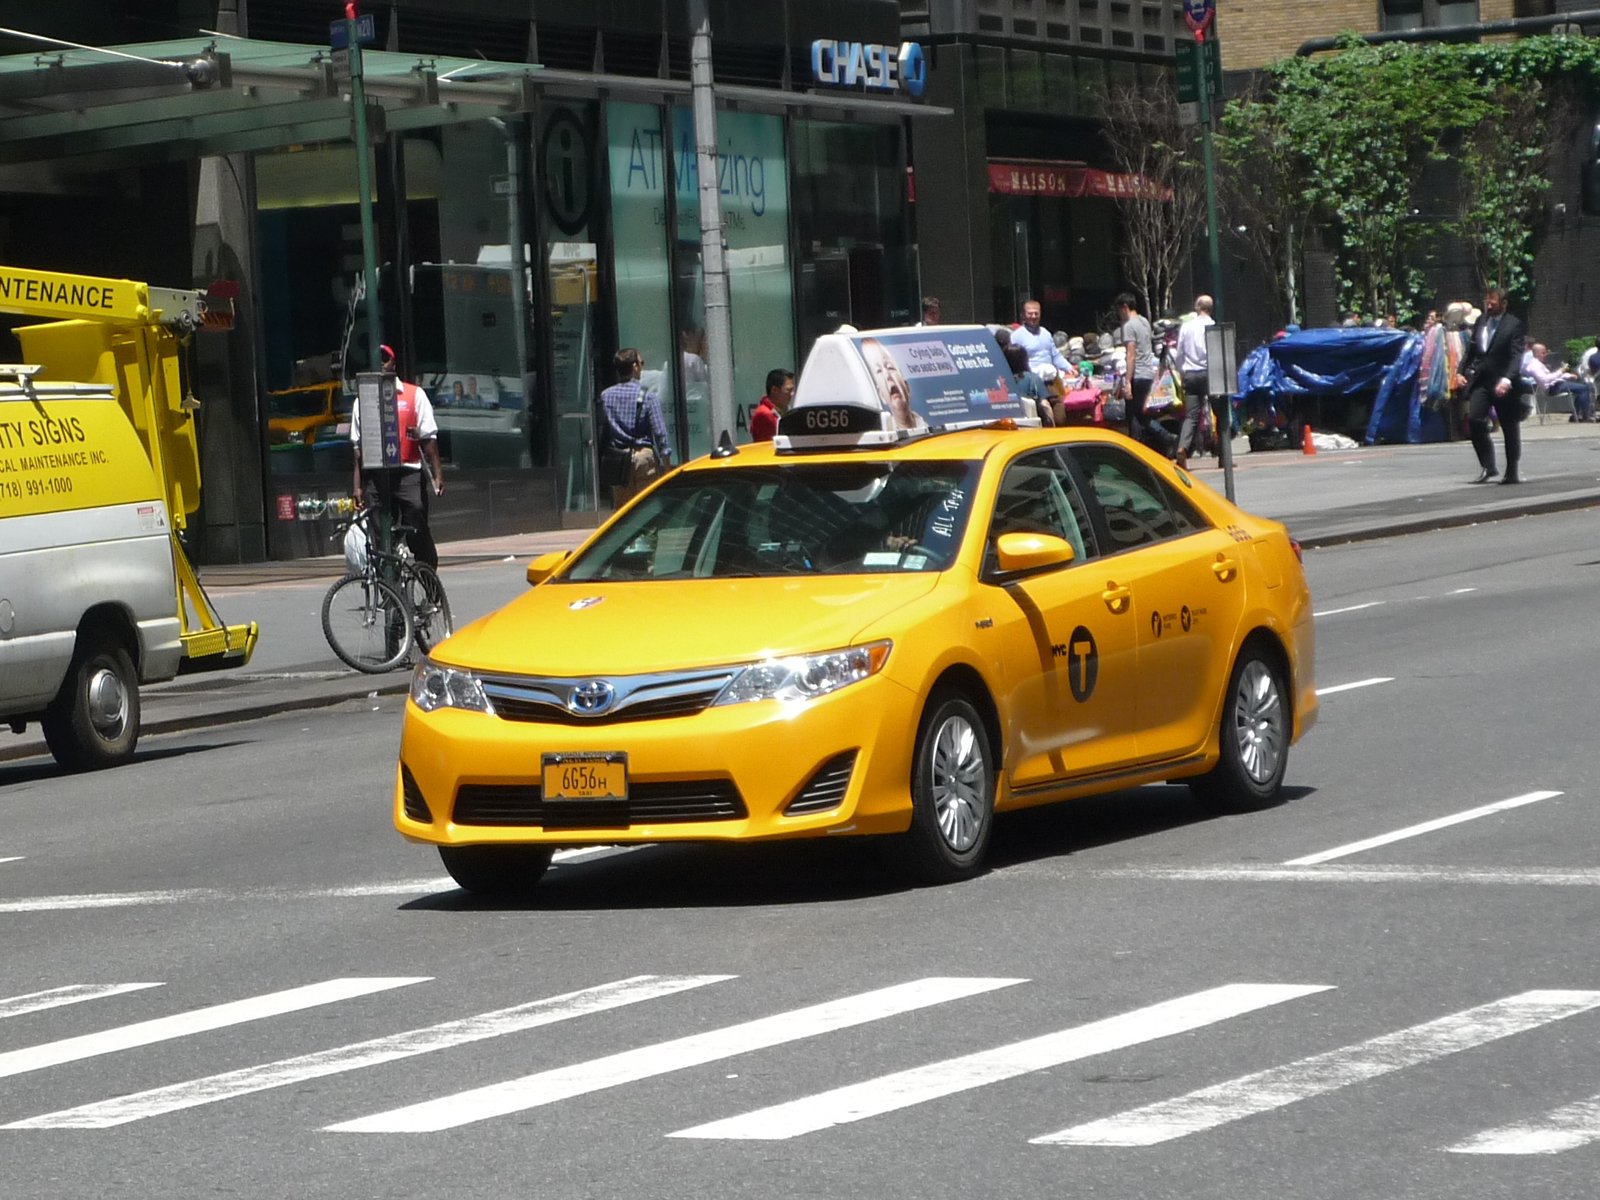 Toyota_Camry_NYC_Taxi_15283757332